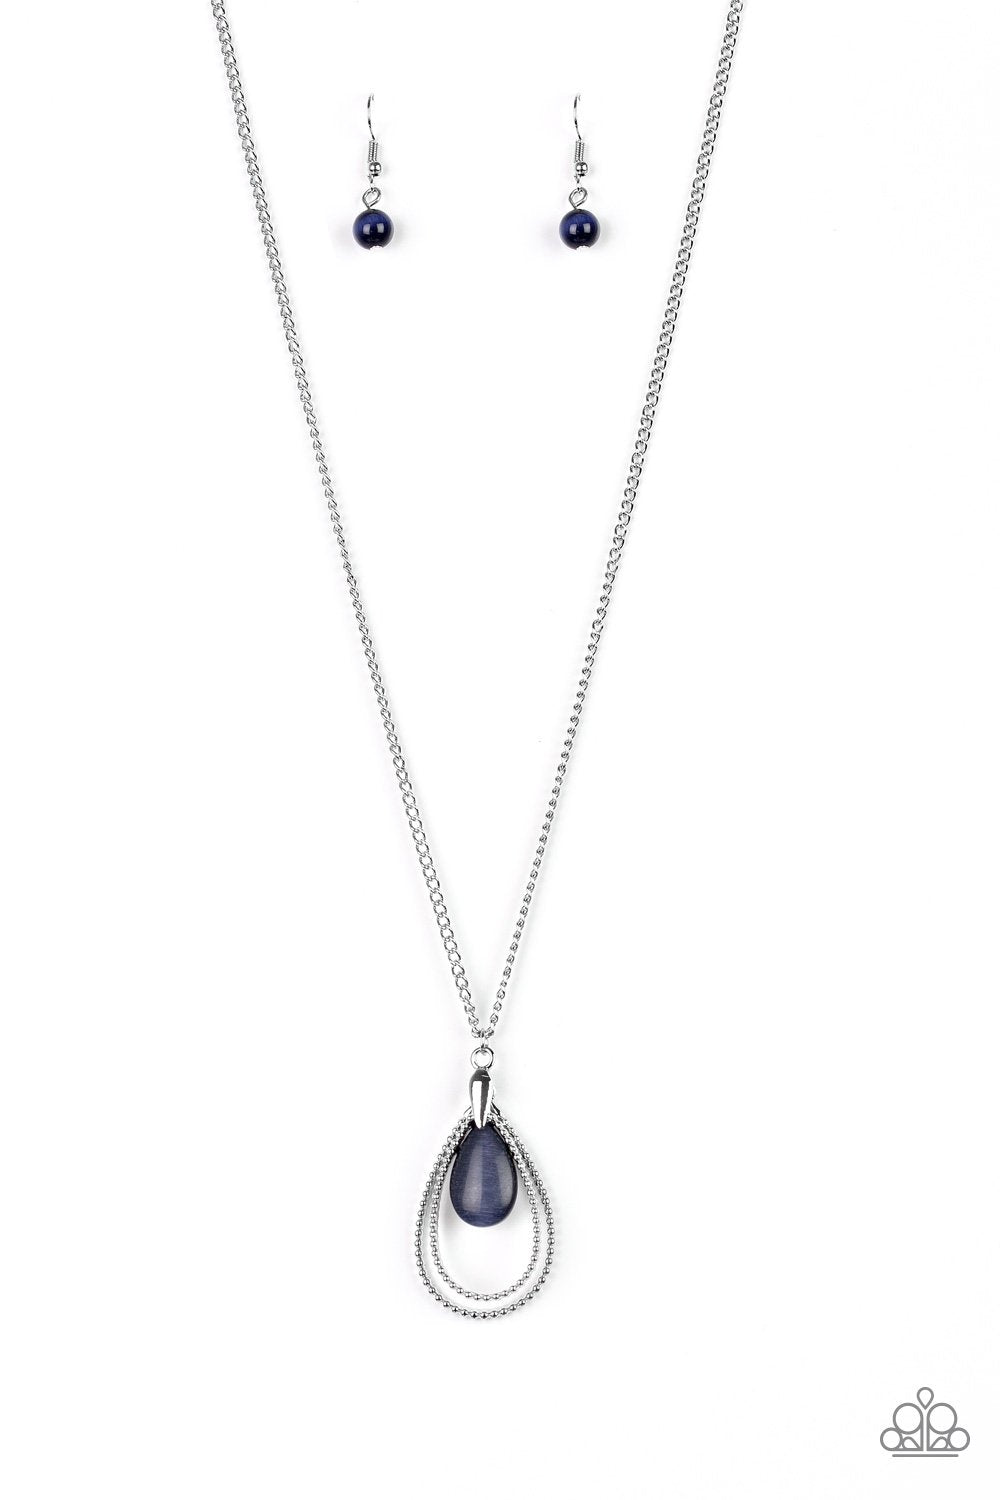 Paparazzi Teardrop Tranquility - Blue Necklace - A Finishing Touch Jewelry